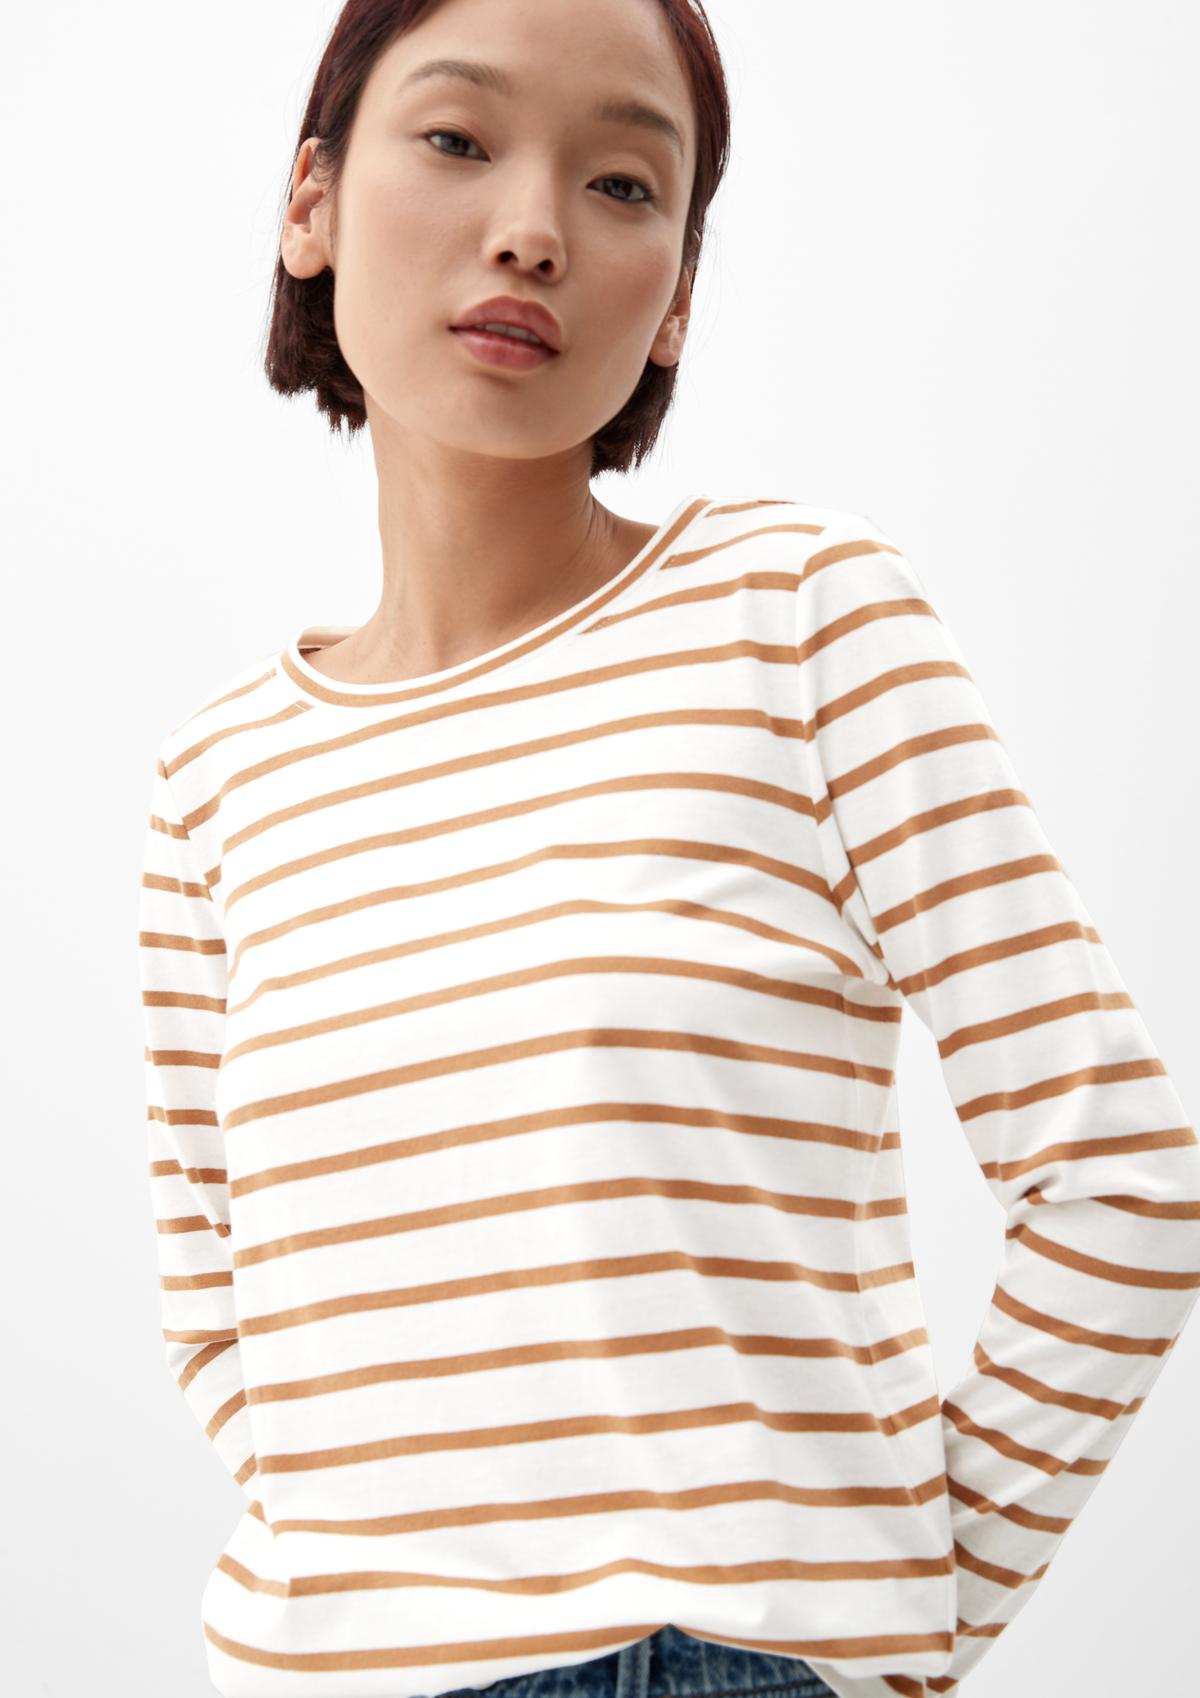 Striped long sleeve - top navy jersey